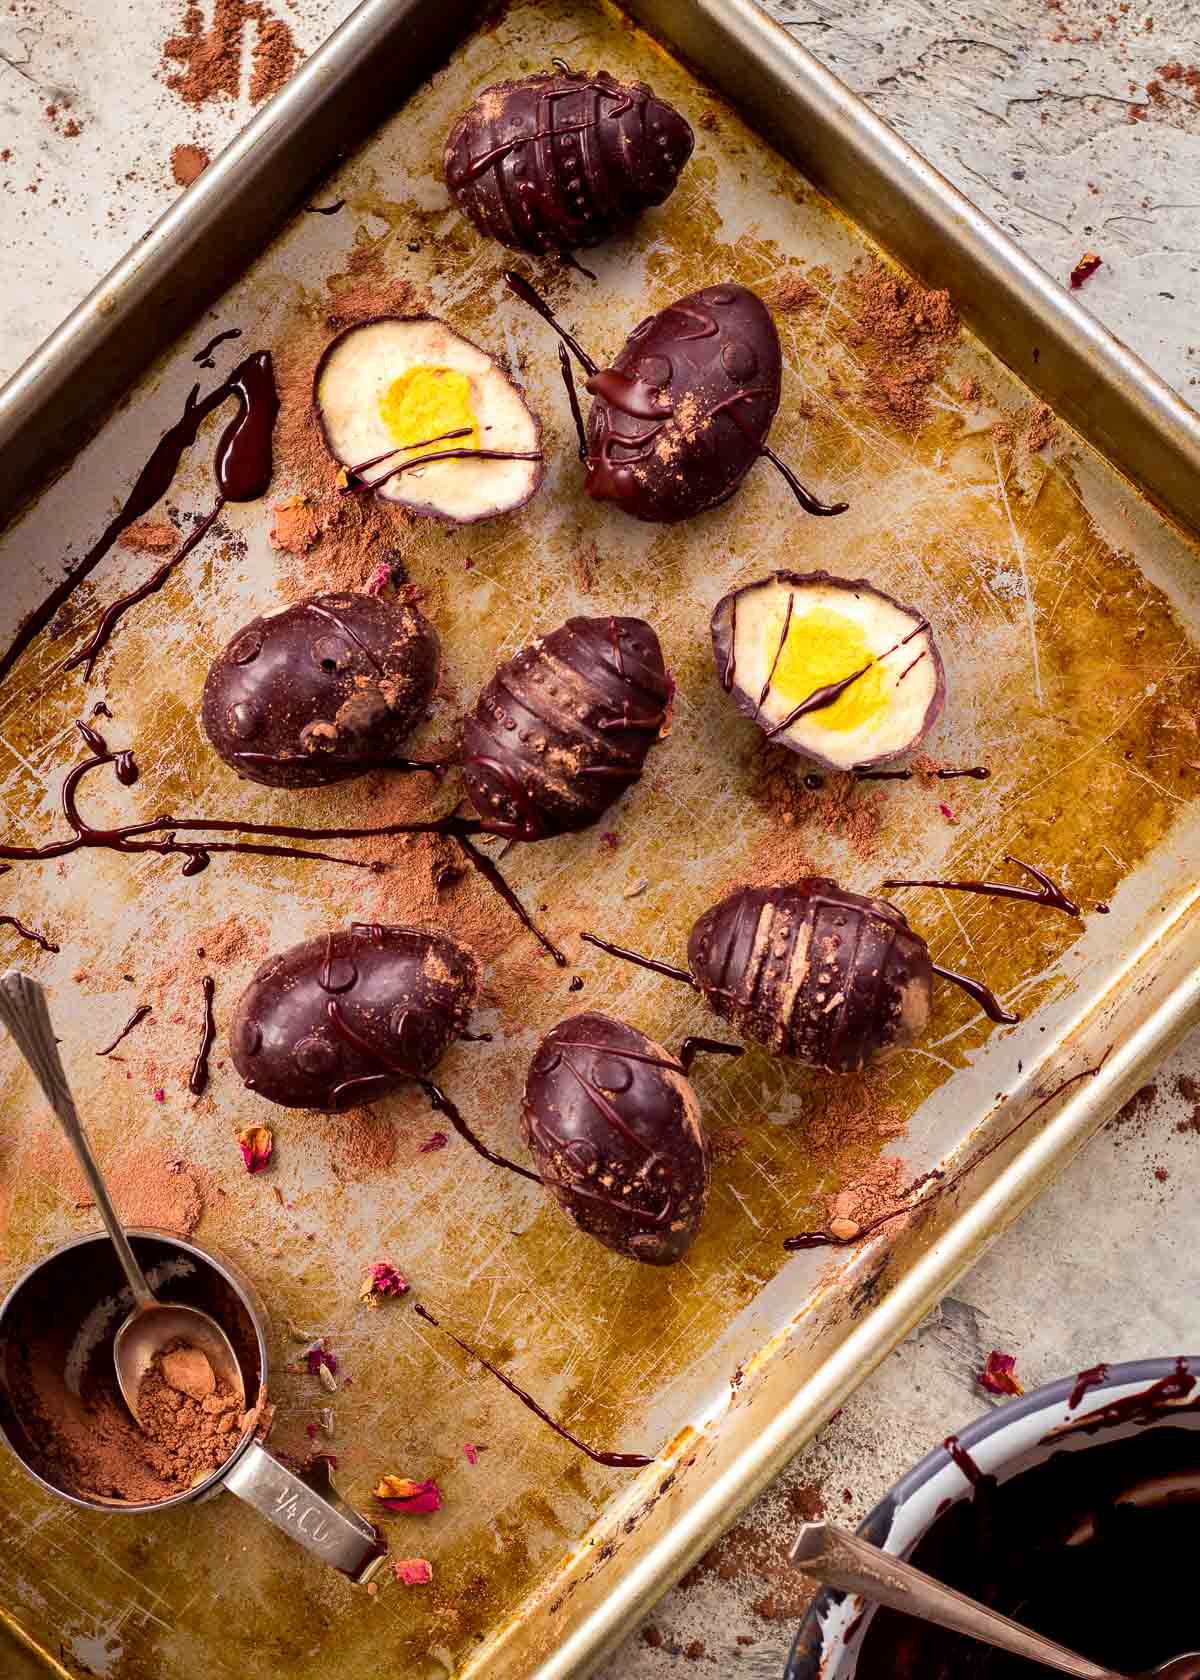 Vegan creme eggs on baking tray drizzled with dark chocolate and with cocoa powder nearby.